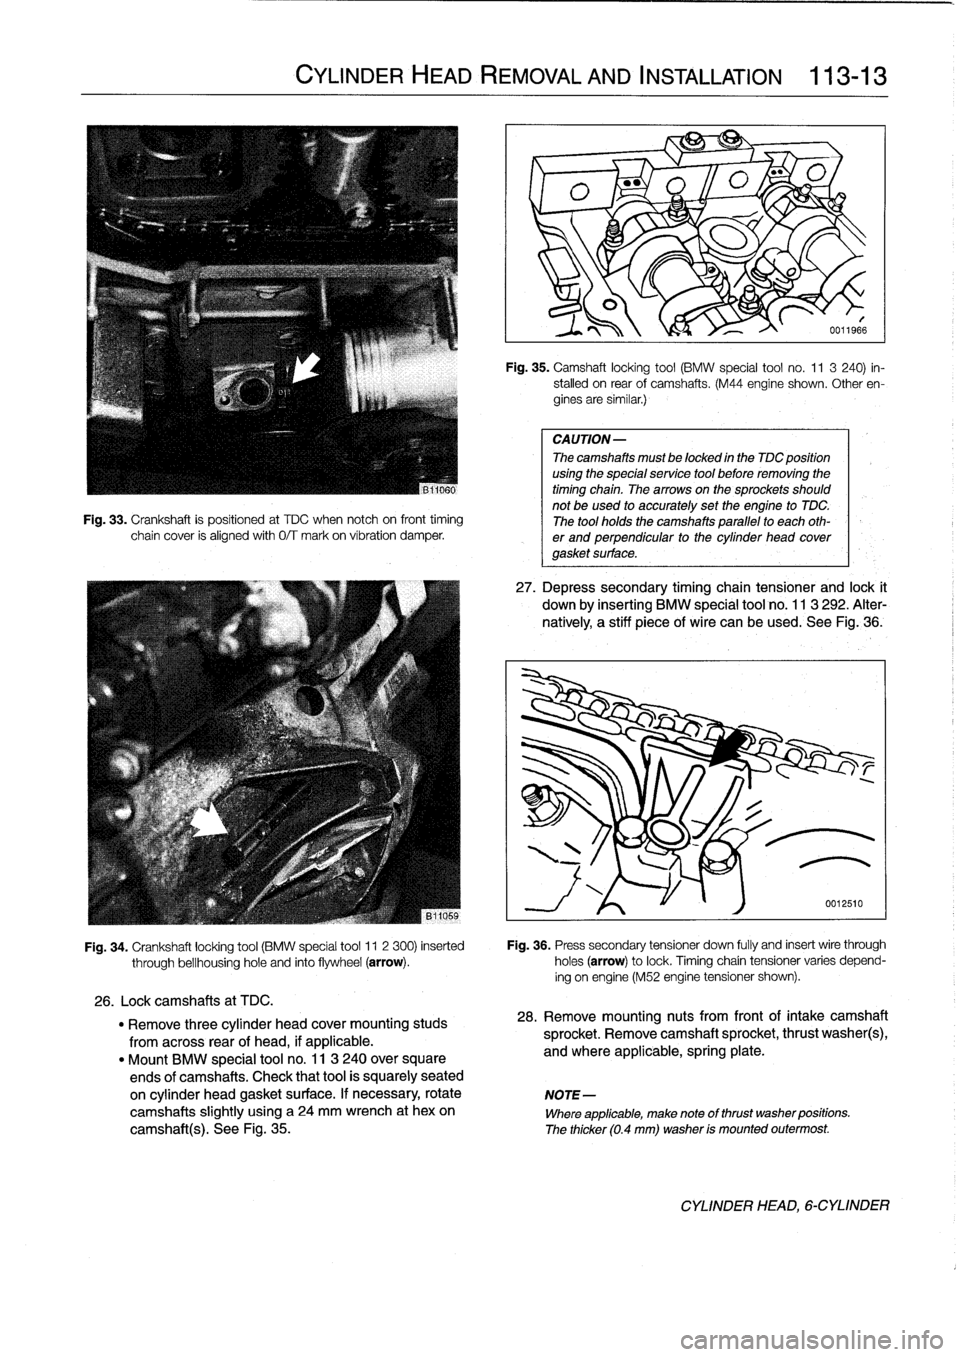 BMW 318i 1997 E36 Owners Manual 
Fig
.
33
.
Crankshaft
is
positioned
at
TDC
when
notch
oh
front
timing
chain
cover
is
alignedwith
0/T
mark
on
víbration
damper
.

CYLINDER
HEAD
REMOVAL
AND
INSTALLATION

	

113-
1
3

Fig
.
35
.
Camsh